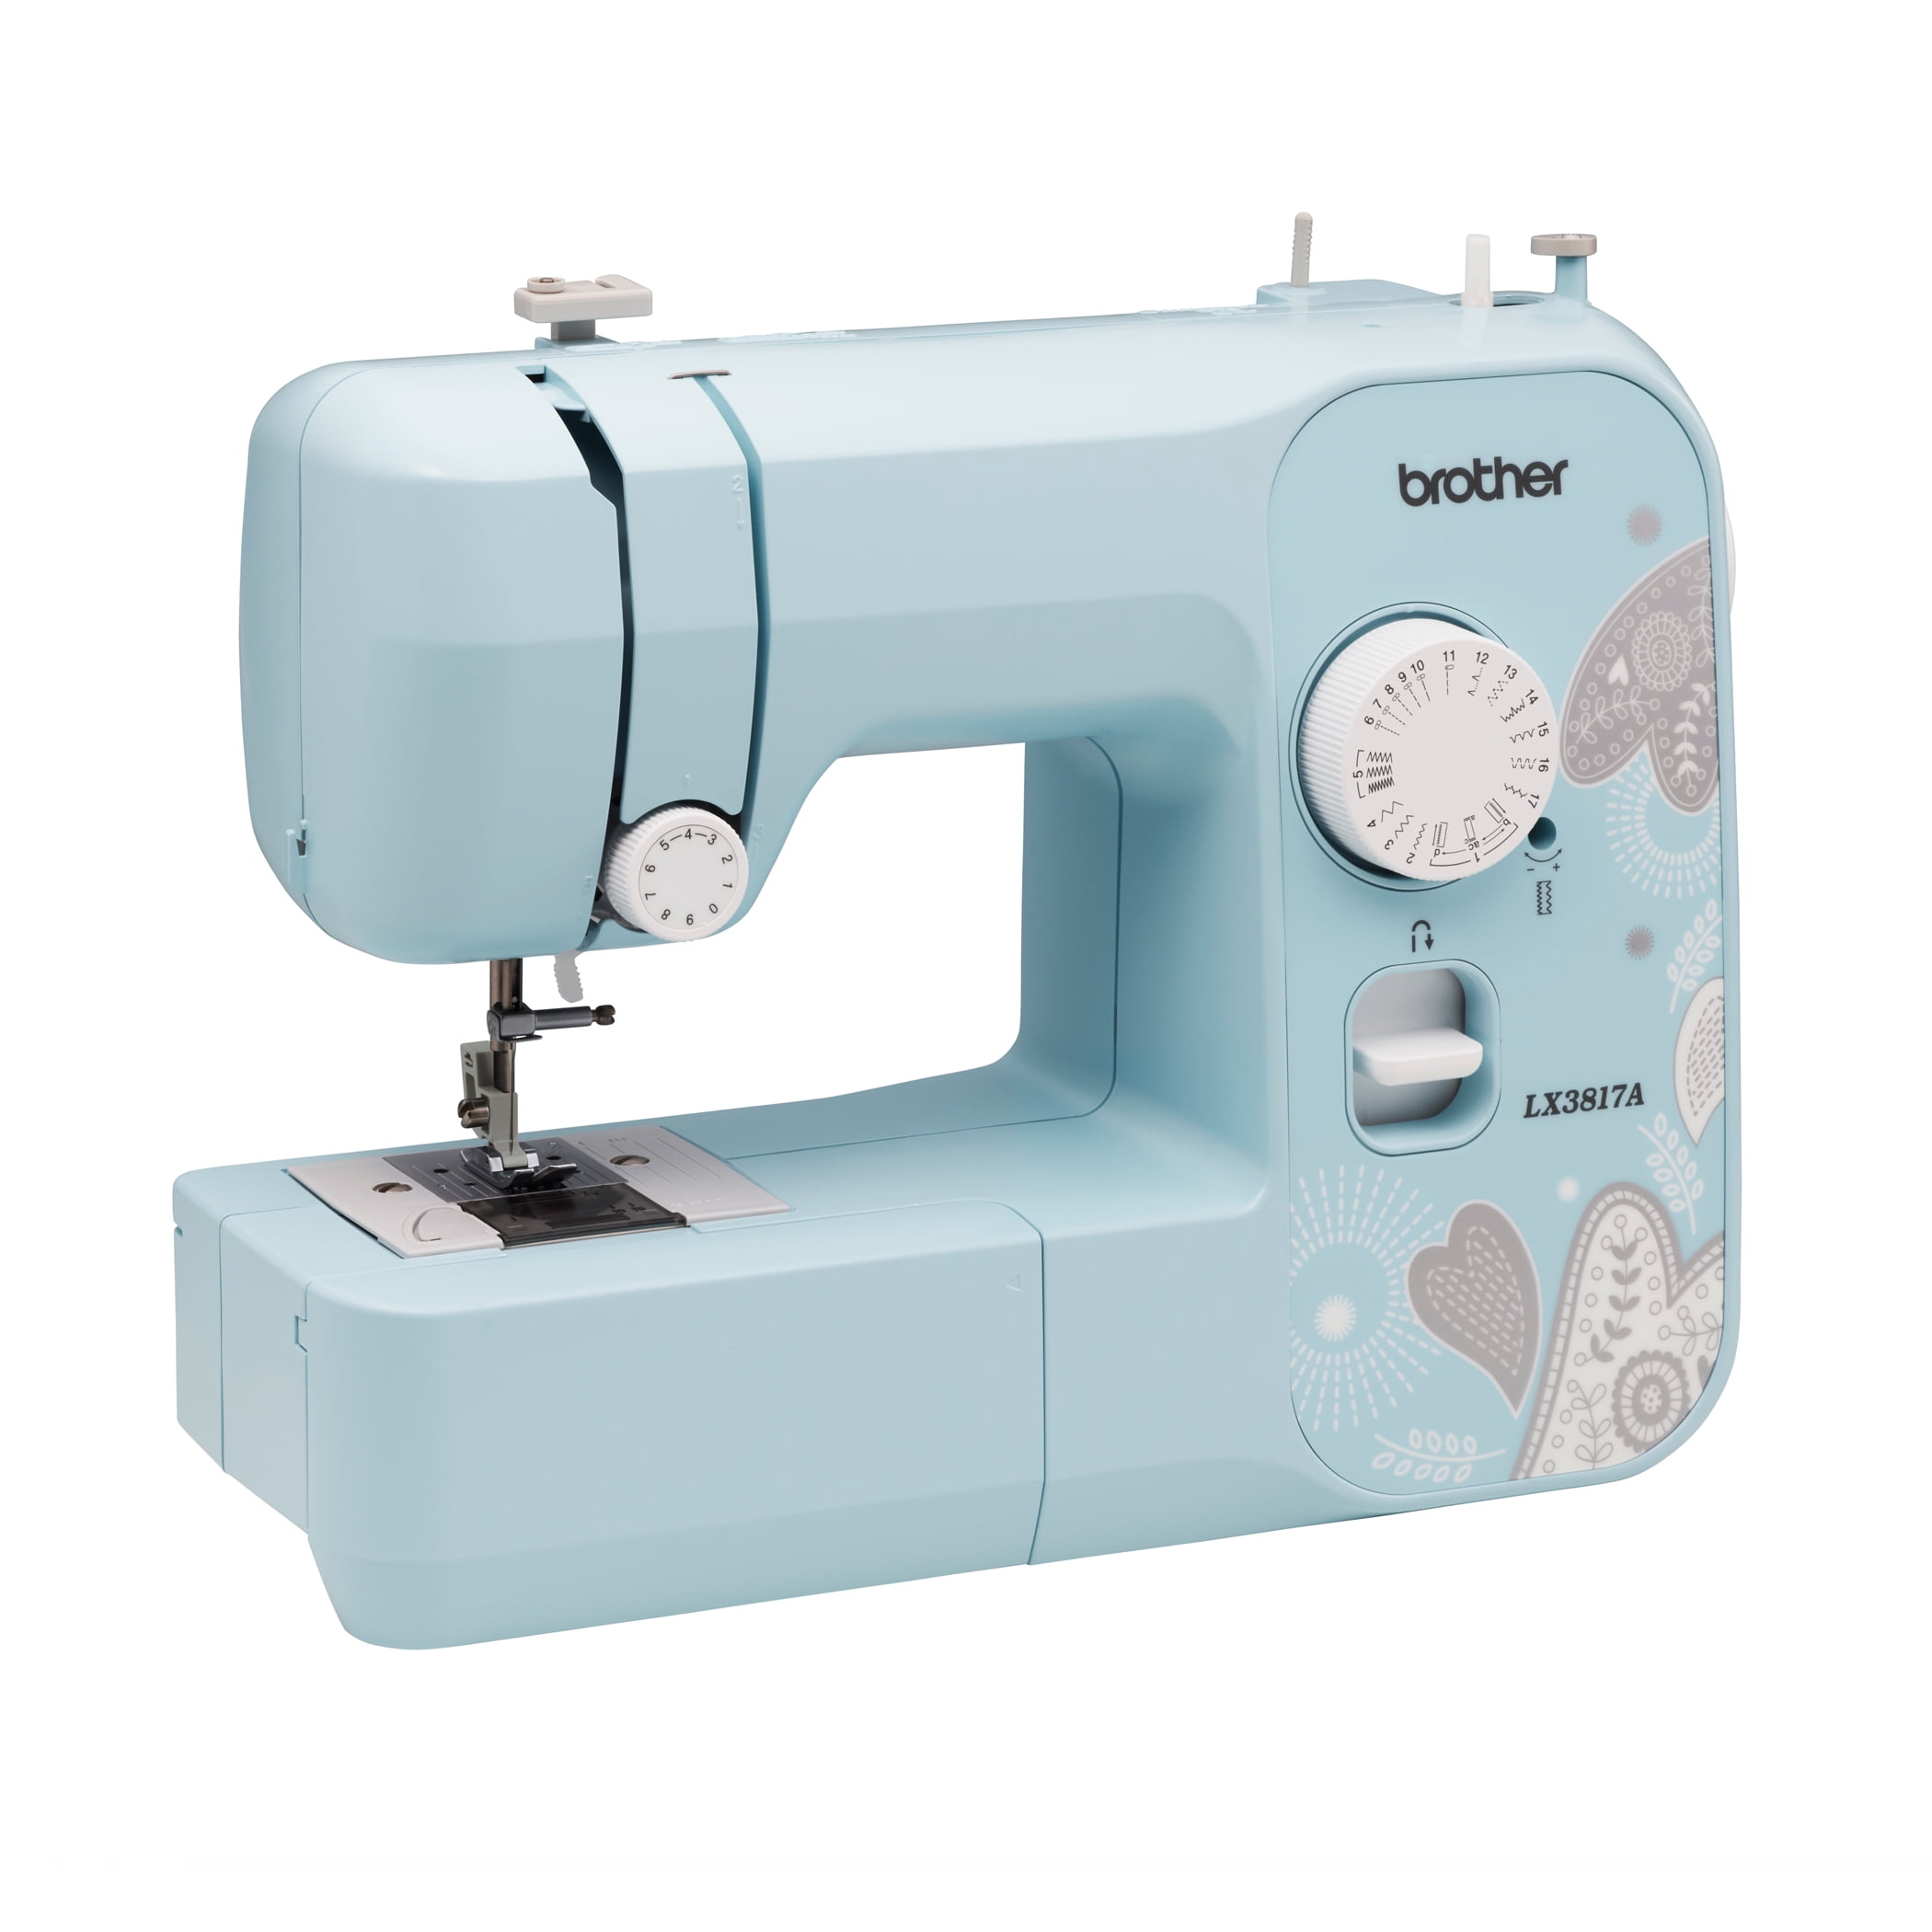 Brother Lx3817 Sewing Machine: A Good Choice for 2022 - FeltMagnet